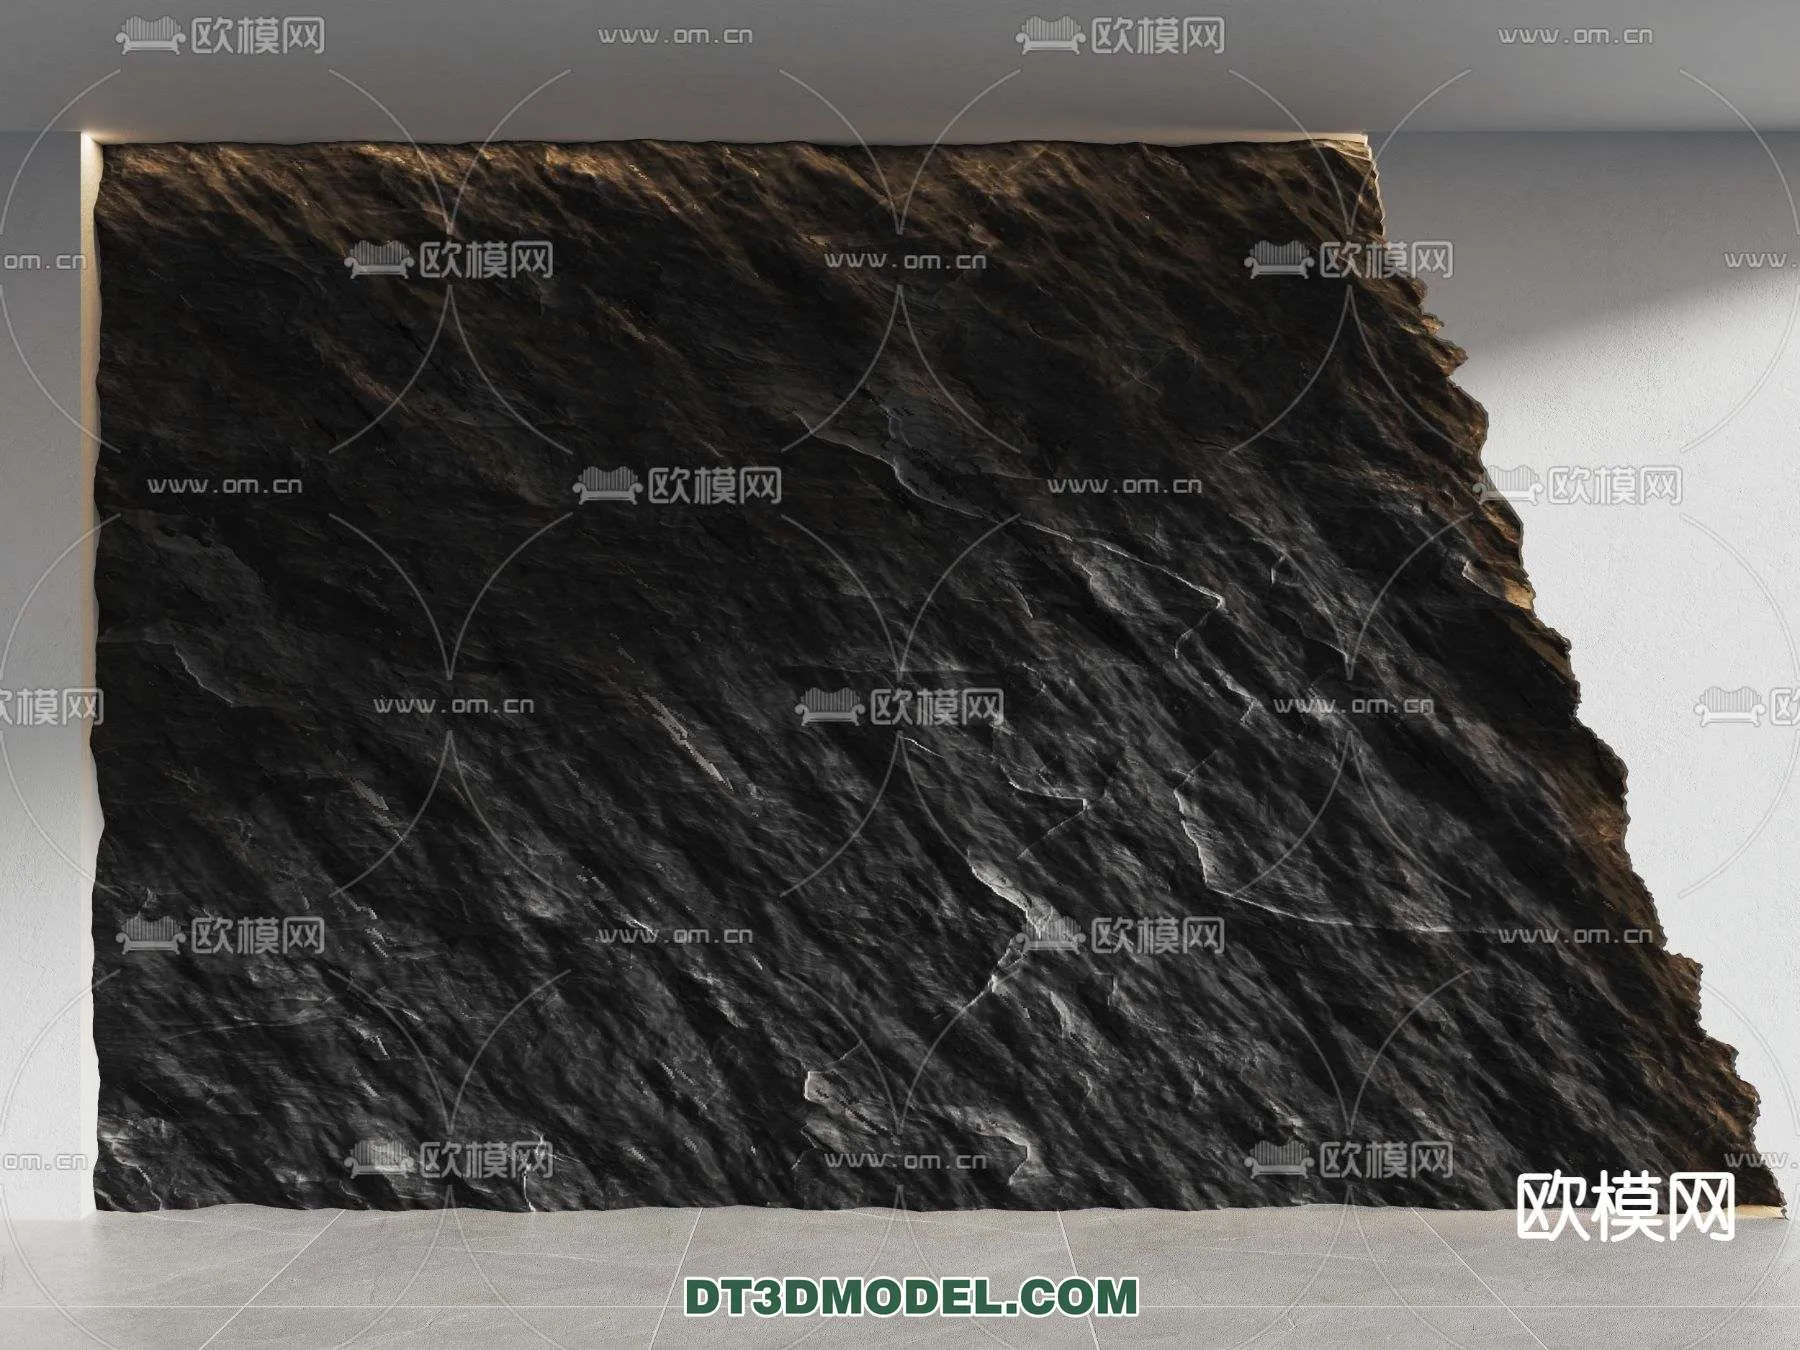 MATERIAL – TEXTURES – ROCK WALL – 0027